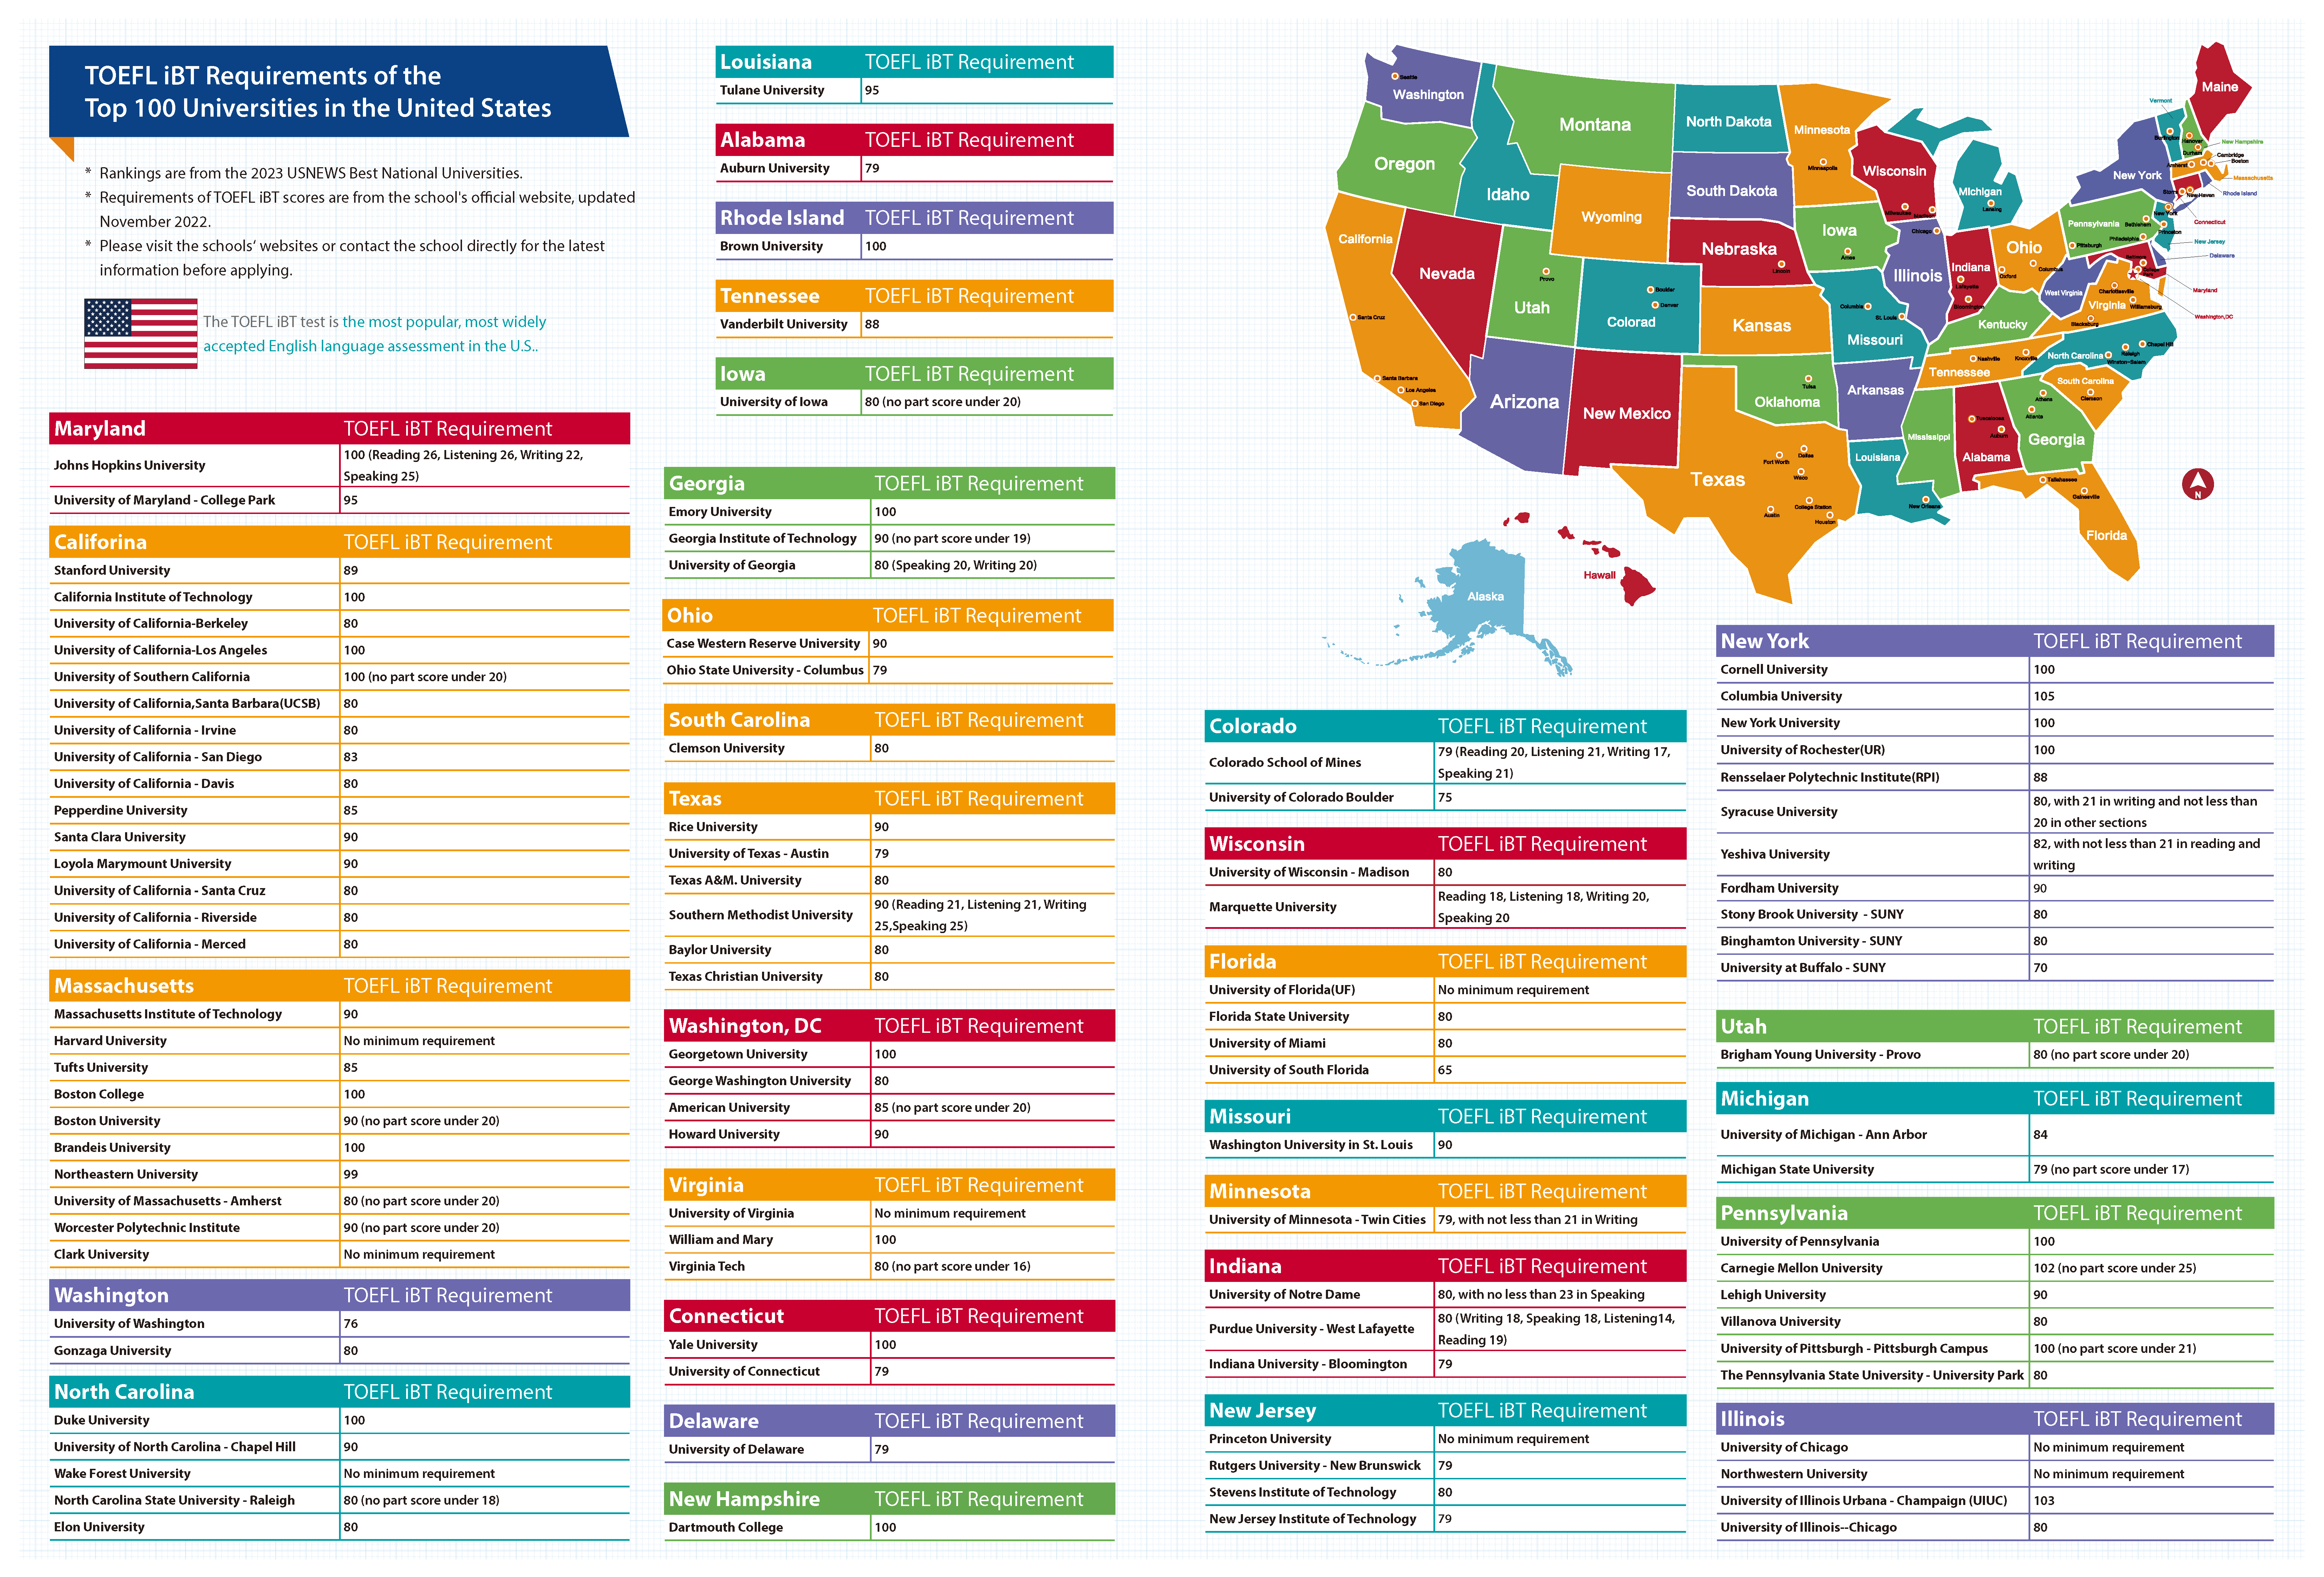 TOEFL iBT Requirements of the Top 100 Universities in the United States